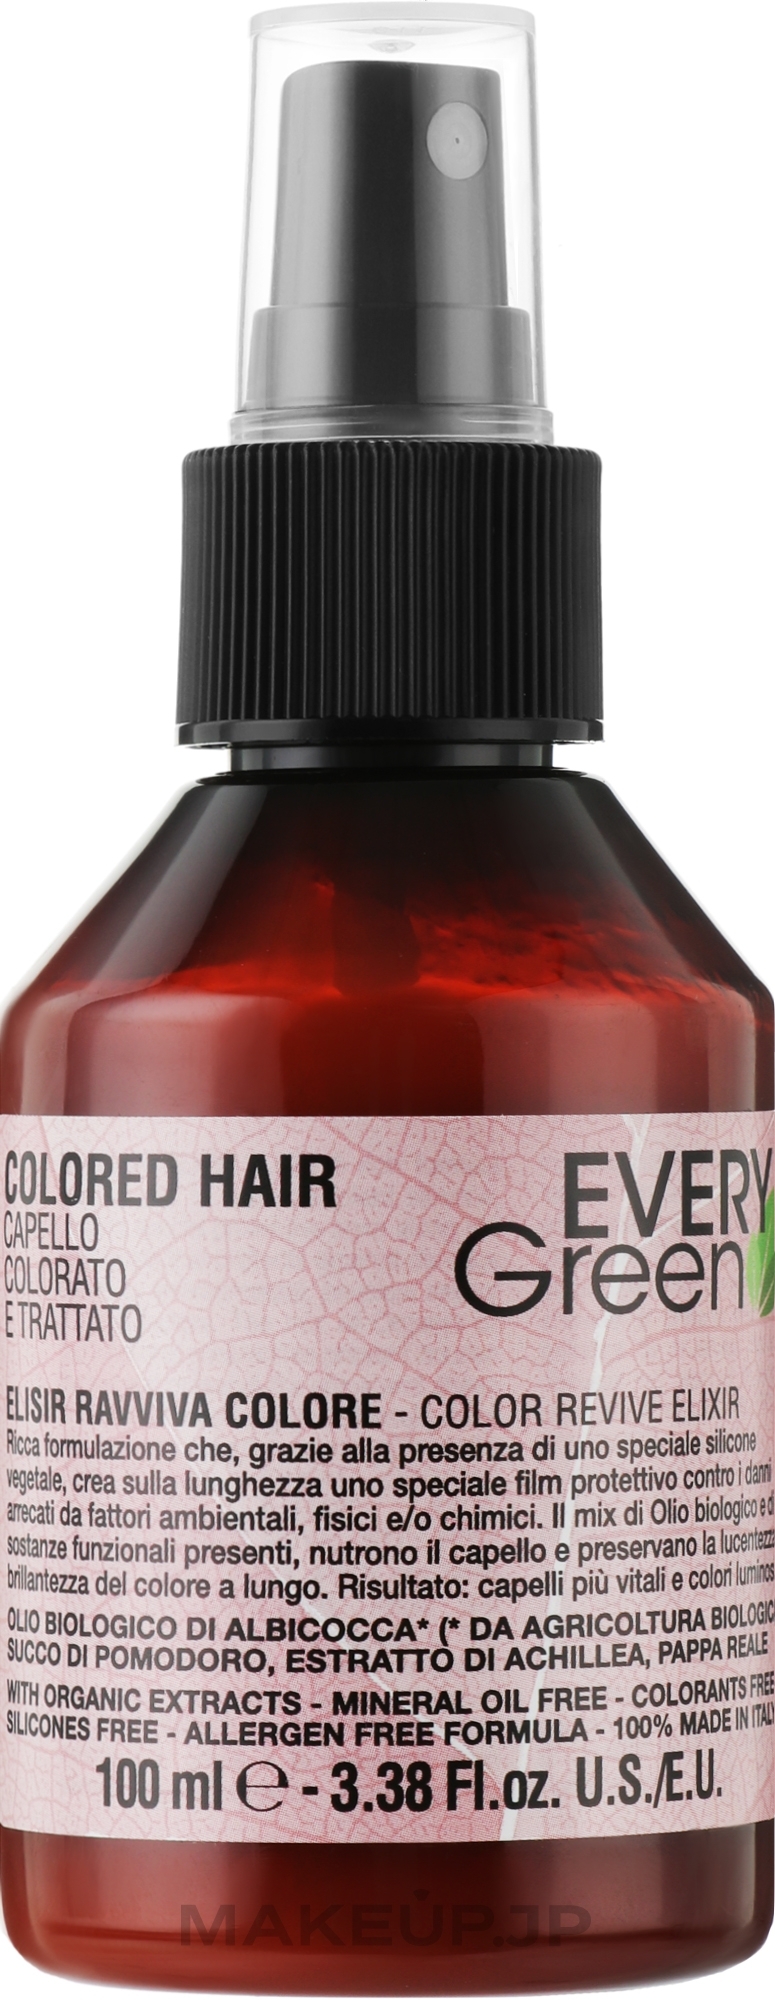 Color Reviving Elixir for Colored Hair - EveryGreen Elisir Ravviva Colore — photo 100 ml